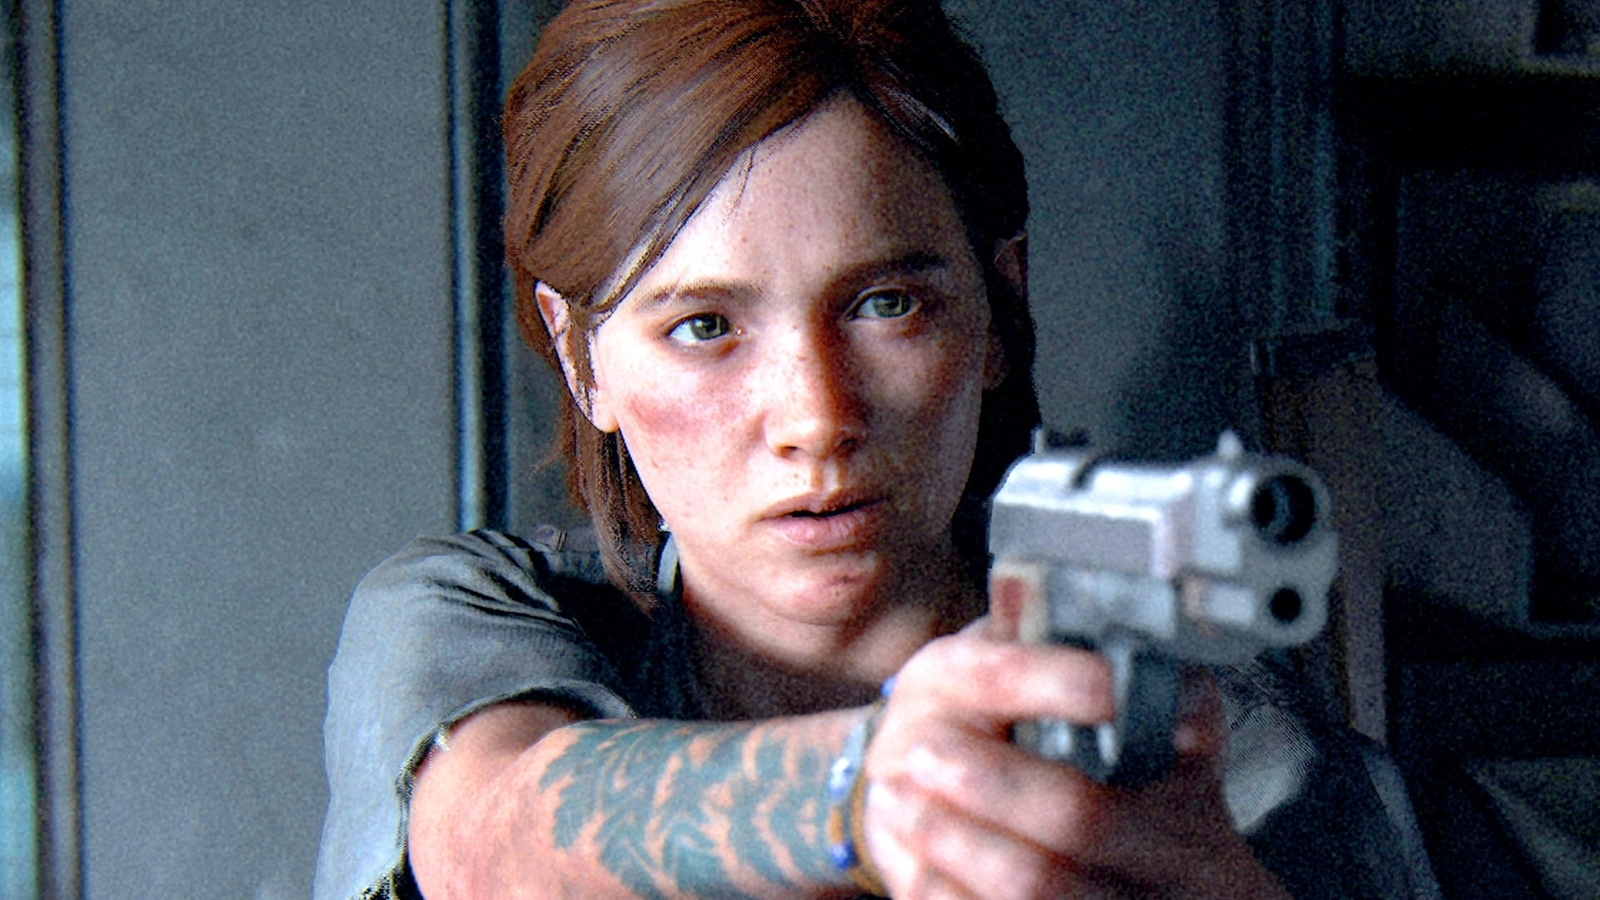 The Last of Us Part 2 Remastered will feature 3 'Lost Levels' Sony confirms